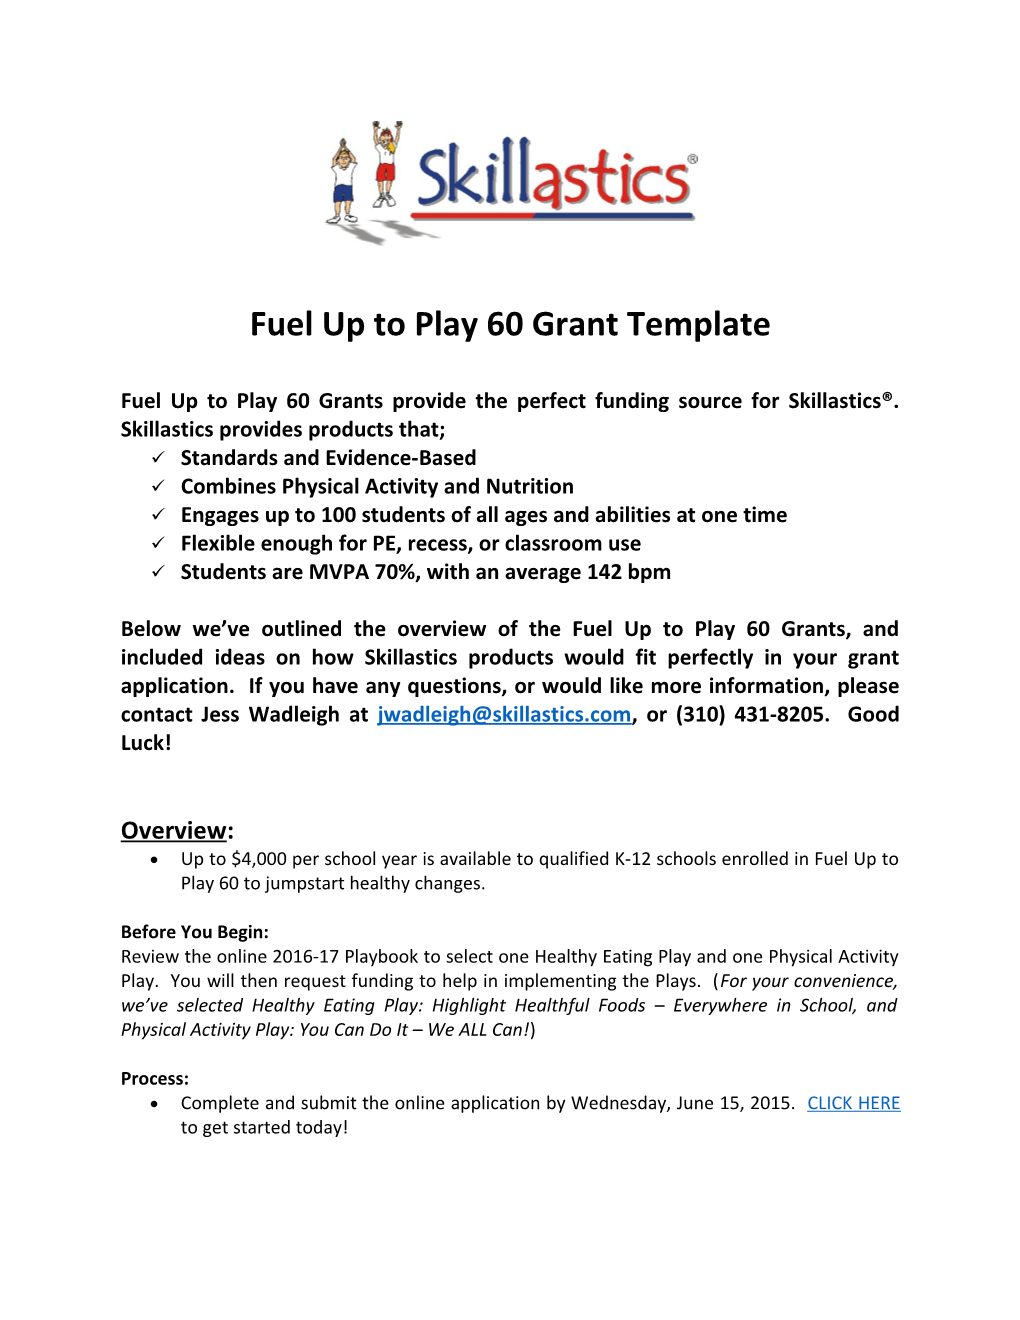 Fuel up to Play 60 Grant Template